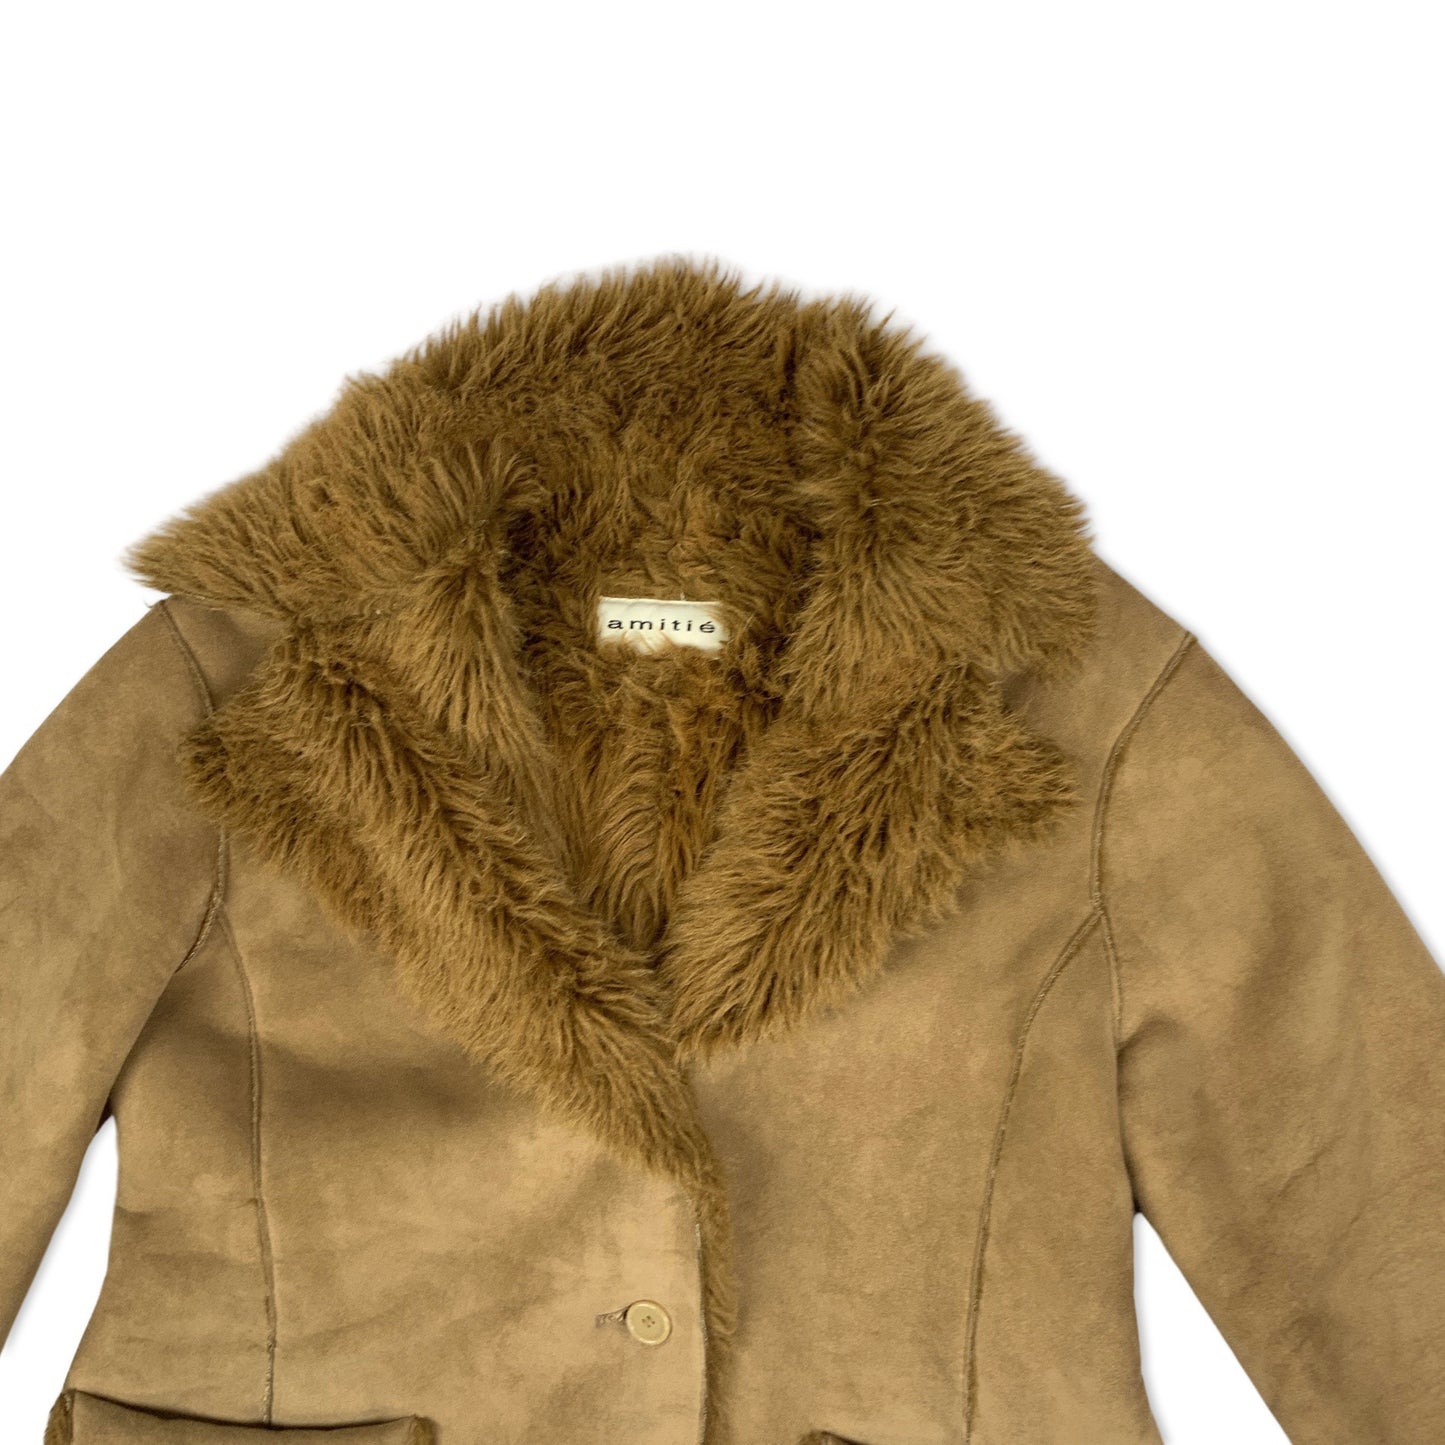 Vintage 90s Brown Shearling Coat with Faux Fur Collar 14 16